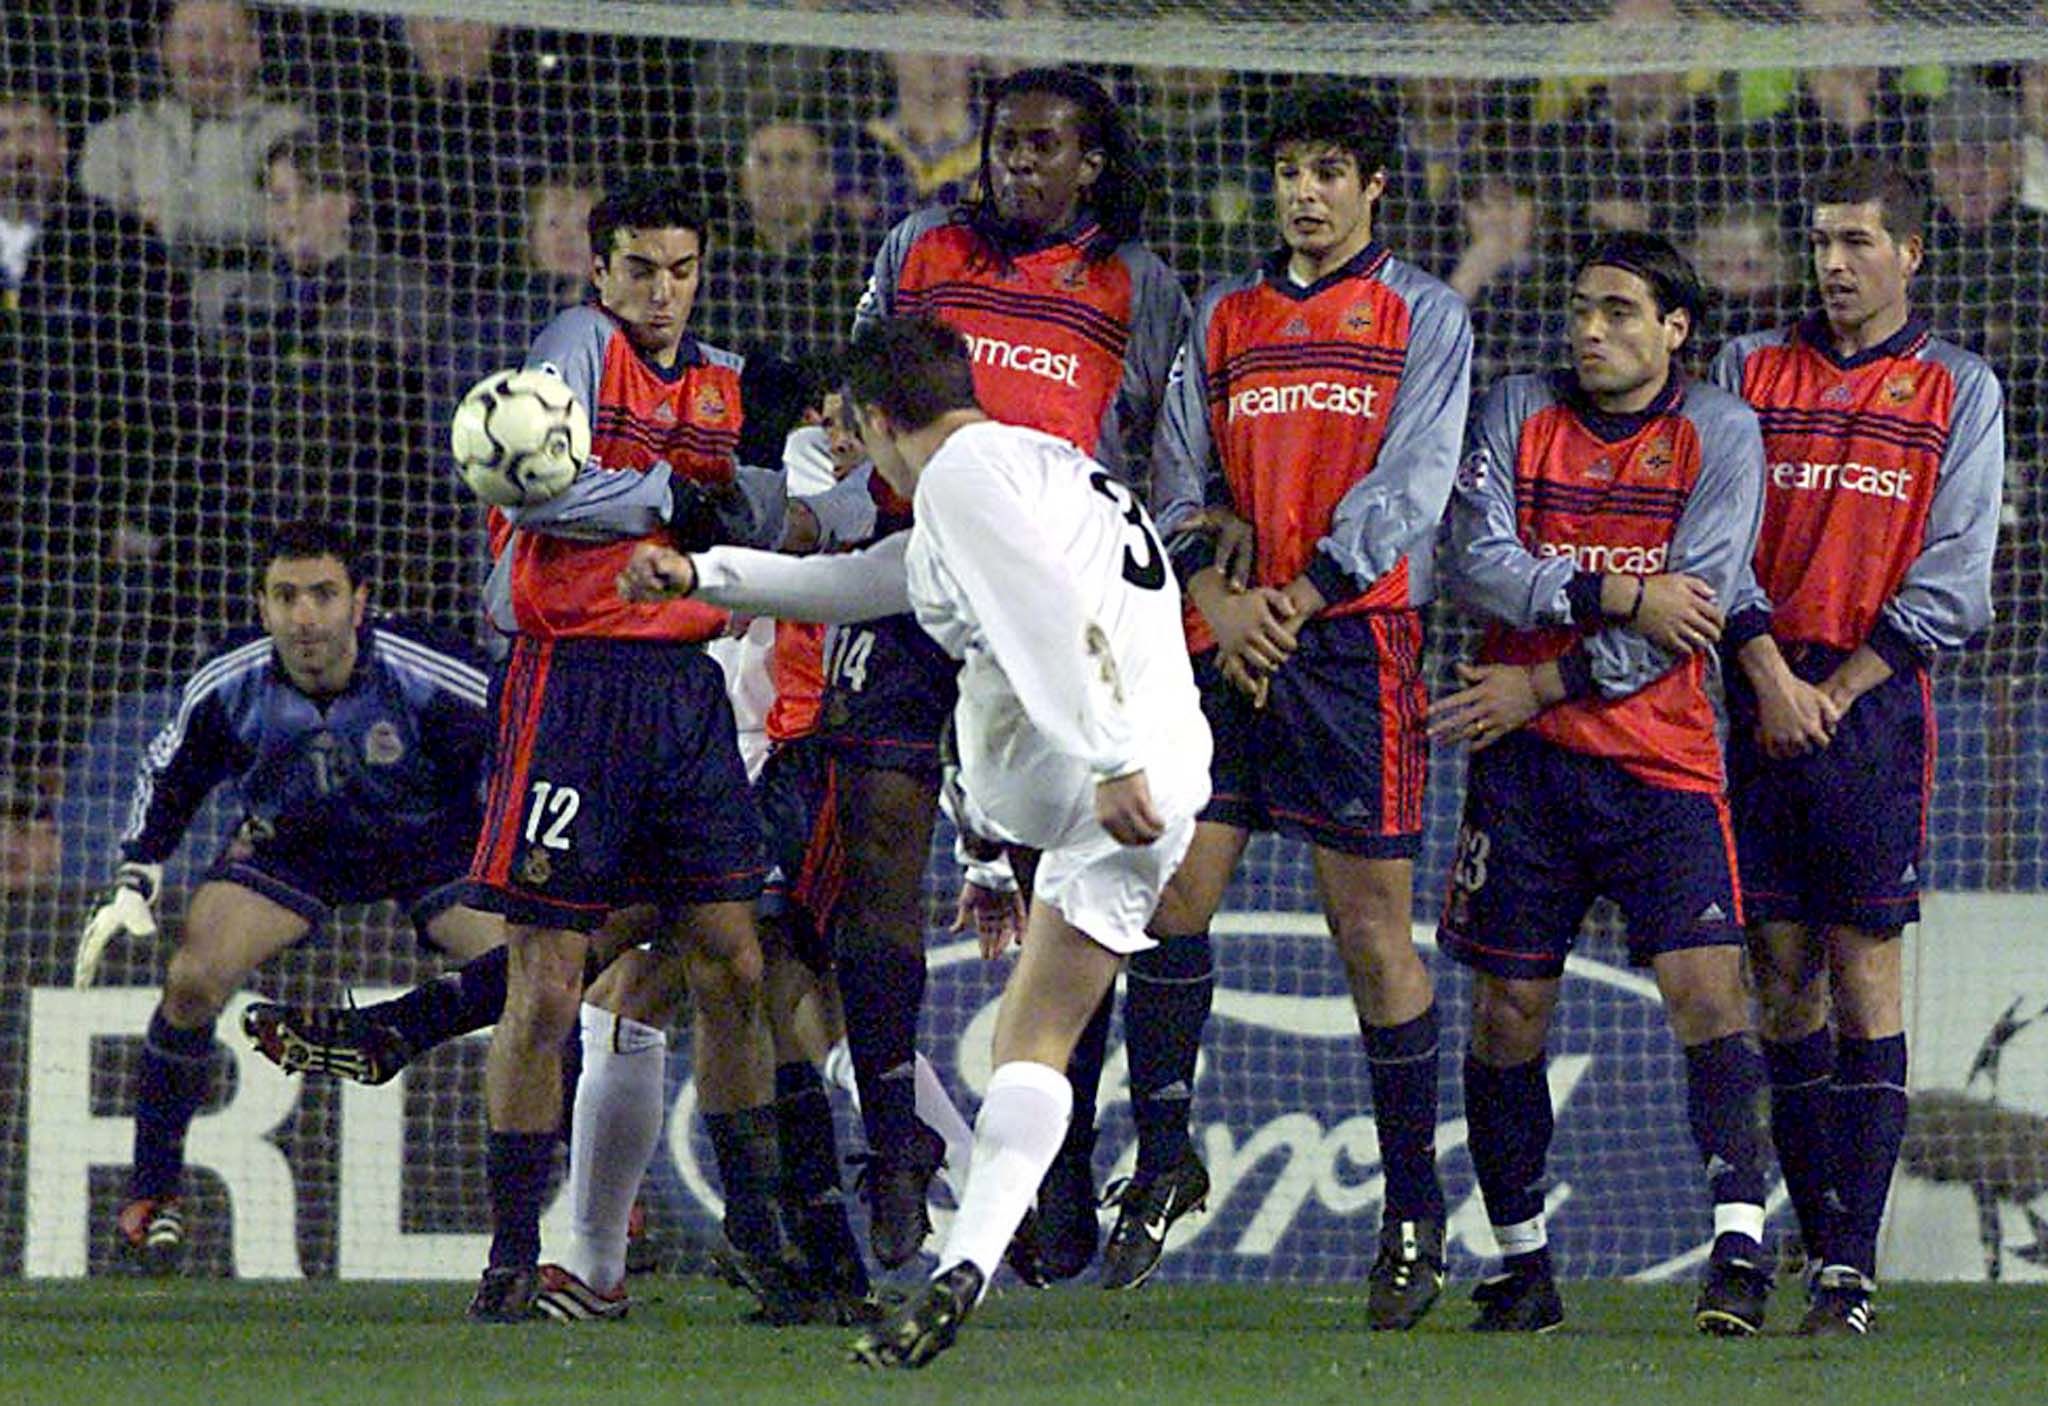 Leeds United's Ian Harte (foreground) scores from a free-kick to take the lead against Deportivo Coruna during their quarter-final Champions League first leg soccer match at Elland road, April 4, 2001.

DCS/IW/AA